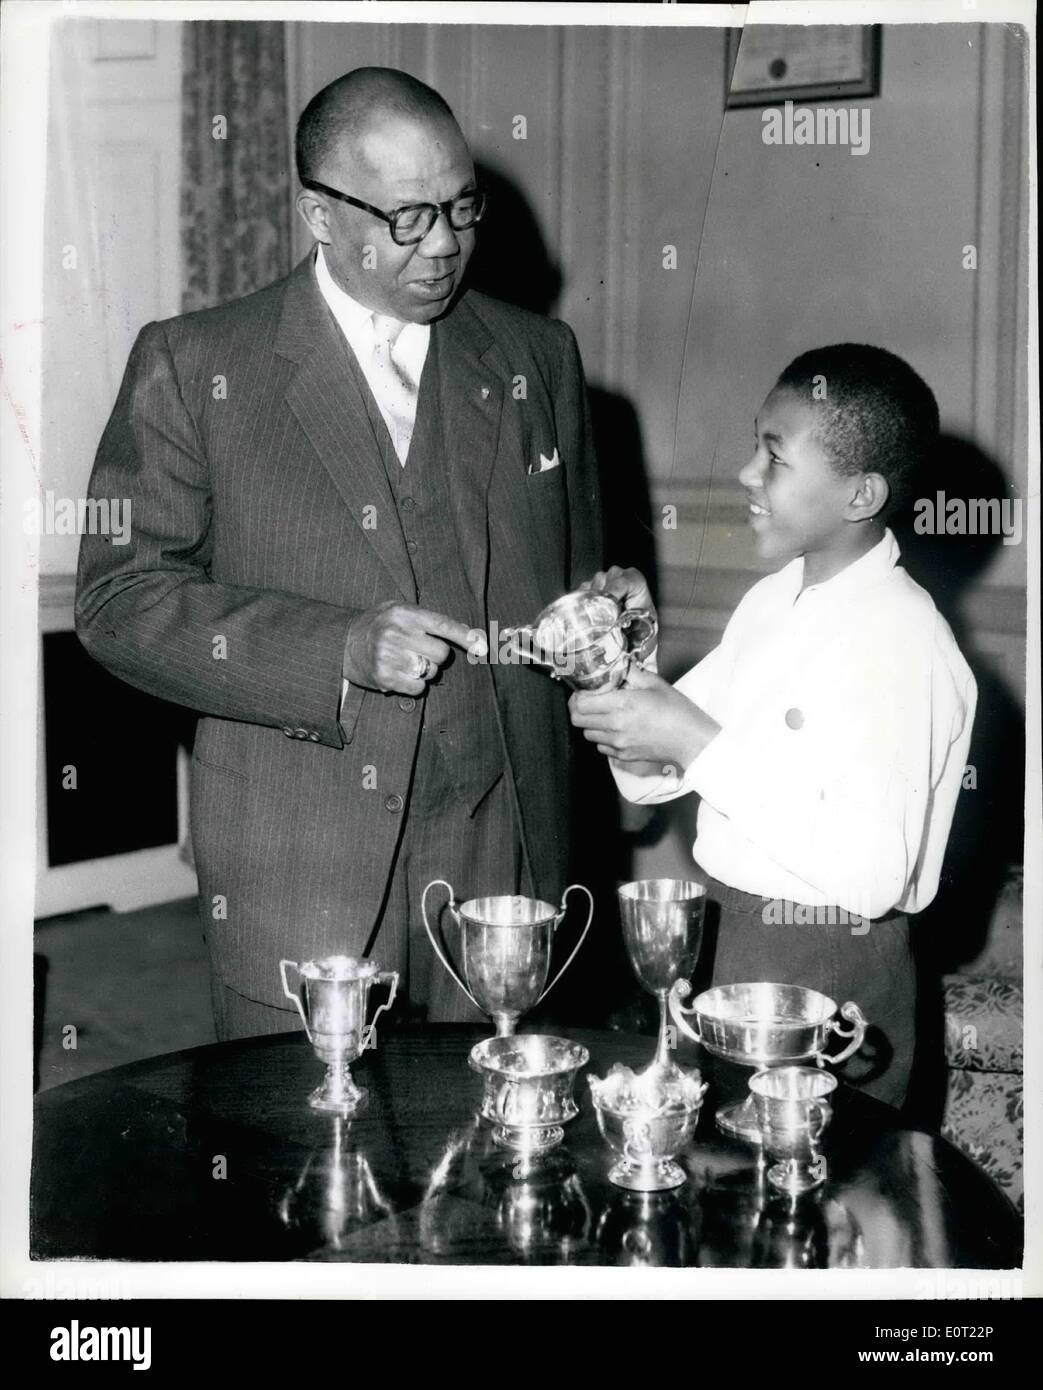 Jul. 07, 1960 - The Athletic son of the Liberian Ambassador to London wins eight cups in one sports meeting: George Brewer (Jnr) - 11year old son of George T. Brewer the Liberian Ambassador to London - took part in his School Sports - Zaton House School, Belagravis - last Thursday - and came away with no fewer that eight silver cups - winning them in the following events --- 80 yards; 100 yards; 330 yards; 220 yards; High Jump; Long Jump; House Relay and the 'Victor Ludurum' cup for the best all round sportsmen. Photo shows George T. Brewer the Ambassador and his athletic son - George Jnr Stock Photo